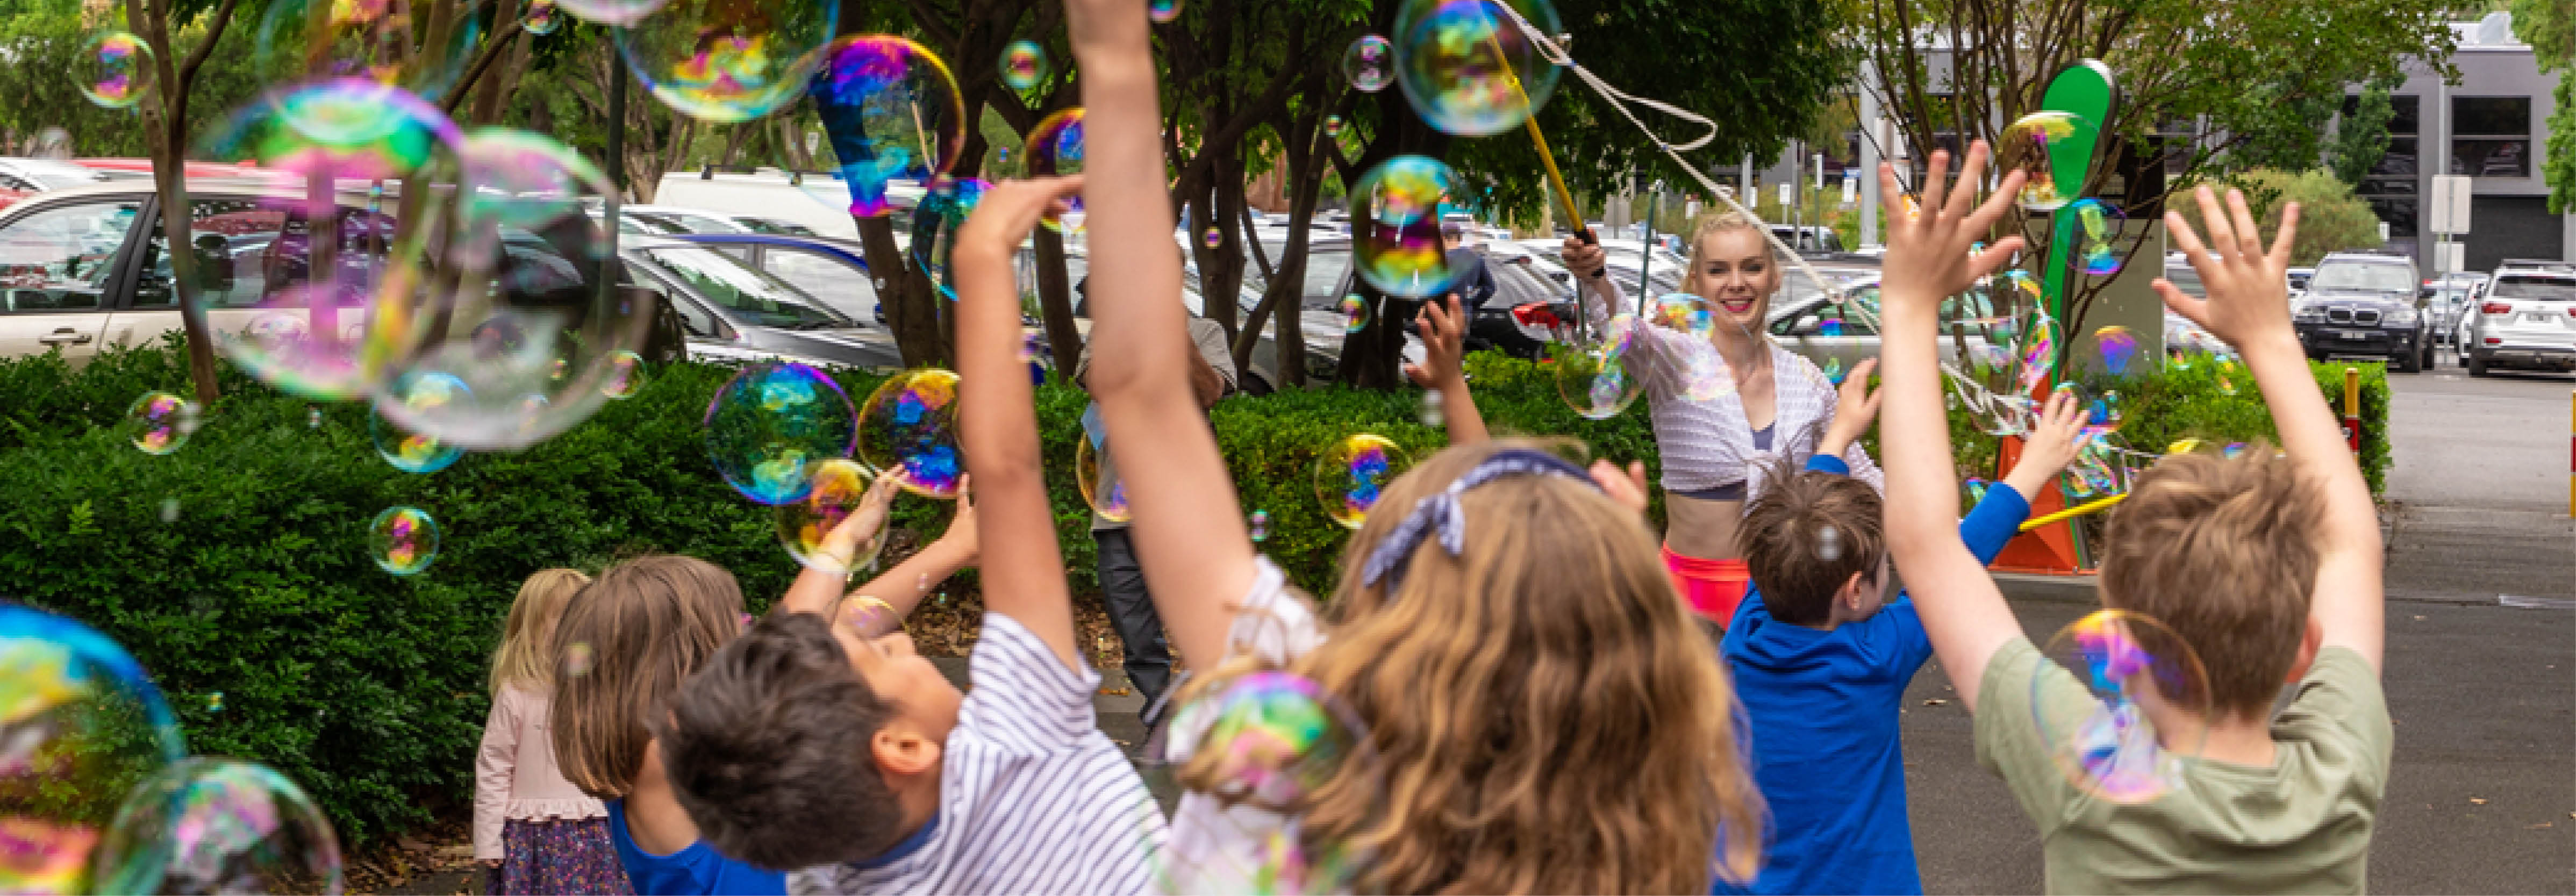 Children reach up for bubbles being blown by a young woman